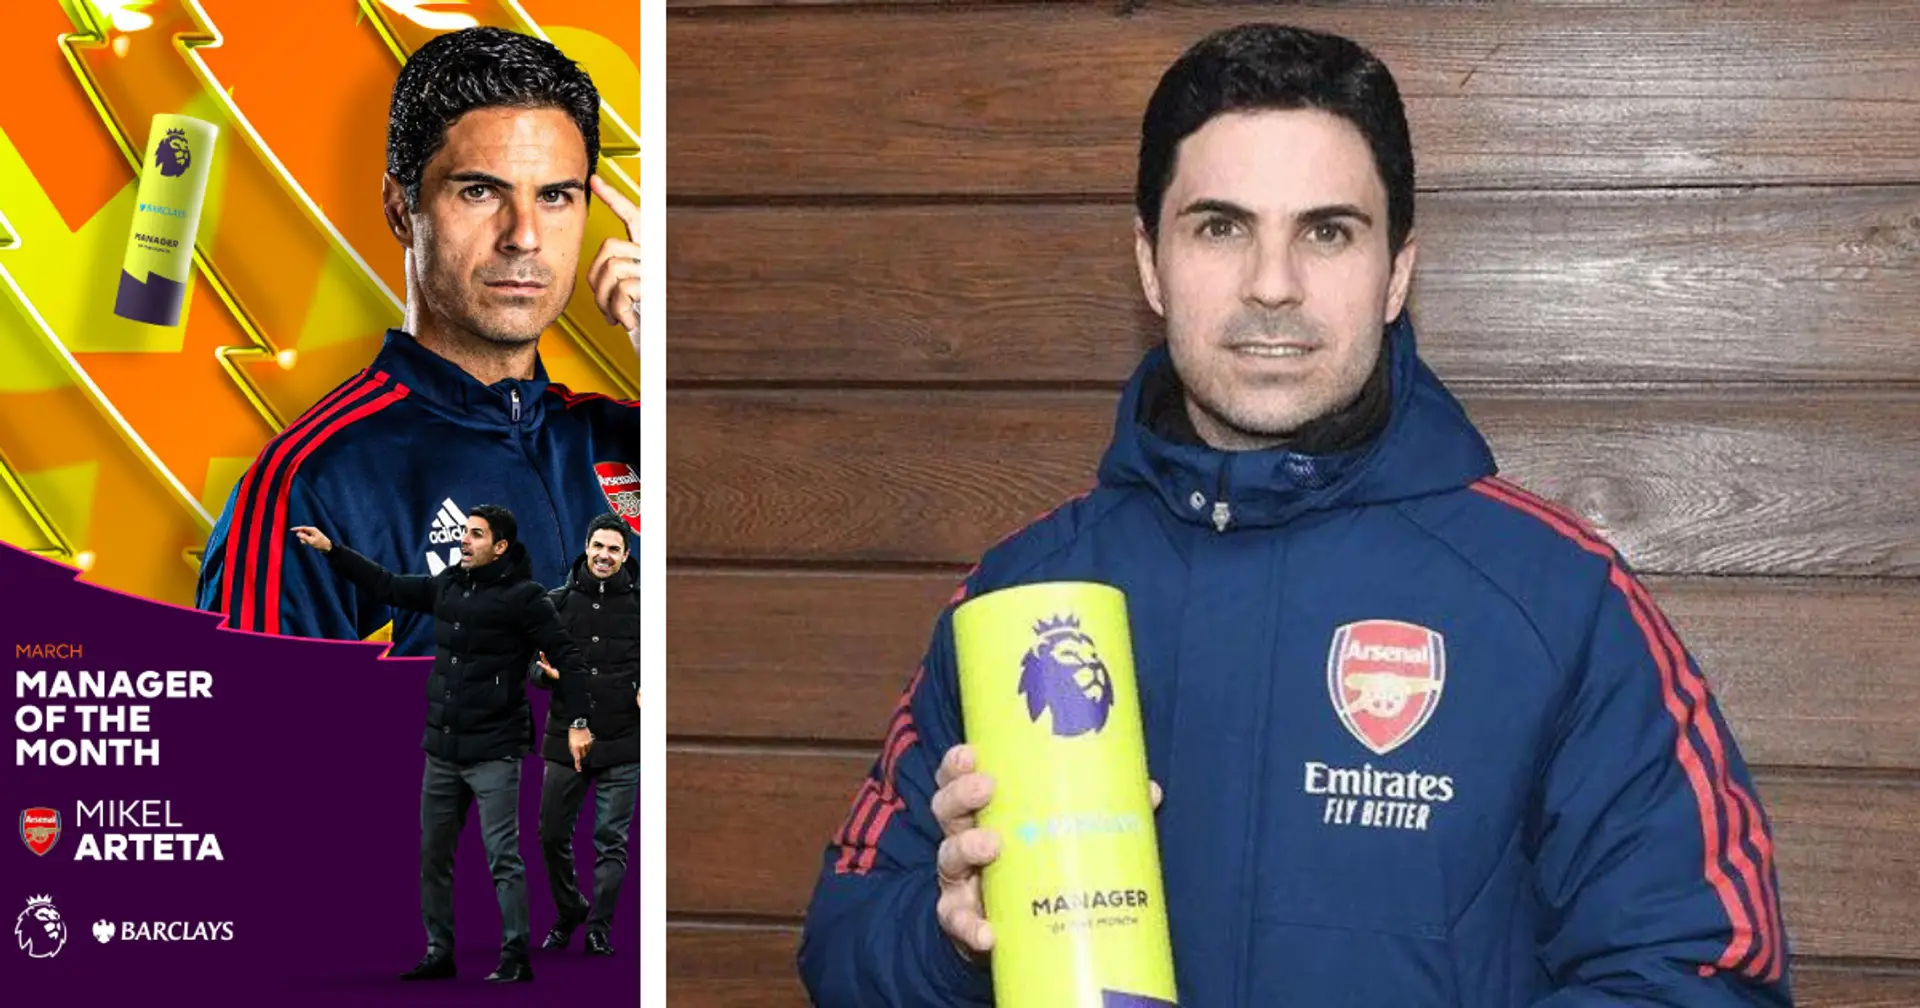 Mikel Arteta wins Premier League Manager of the Month — it's his 4th time this season